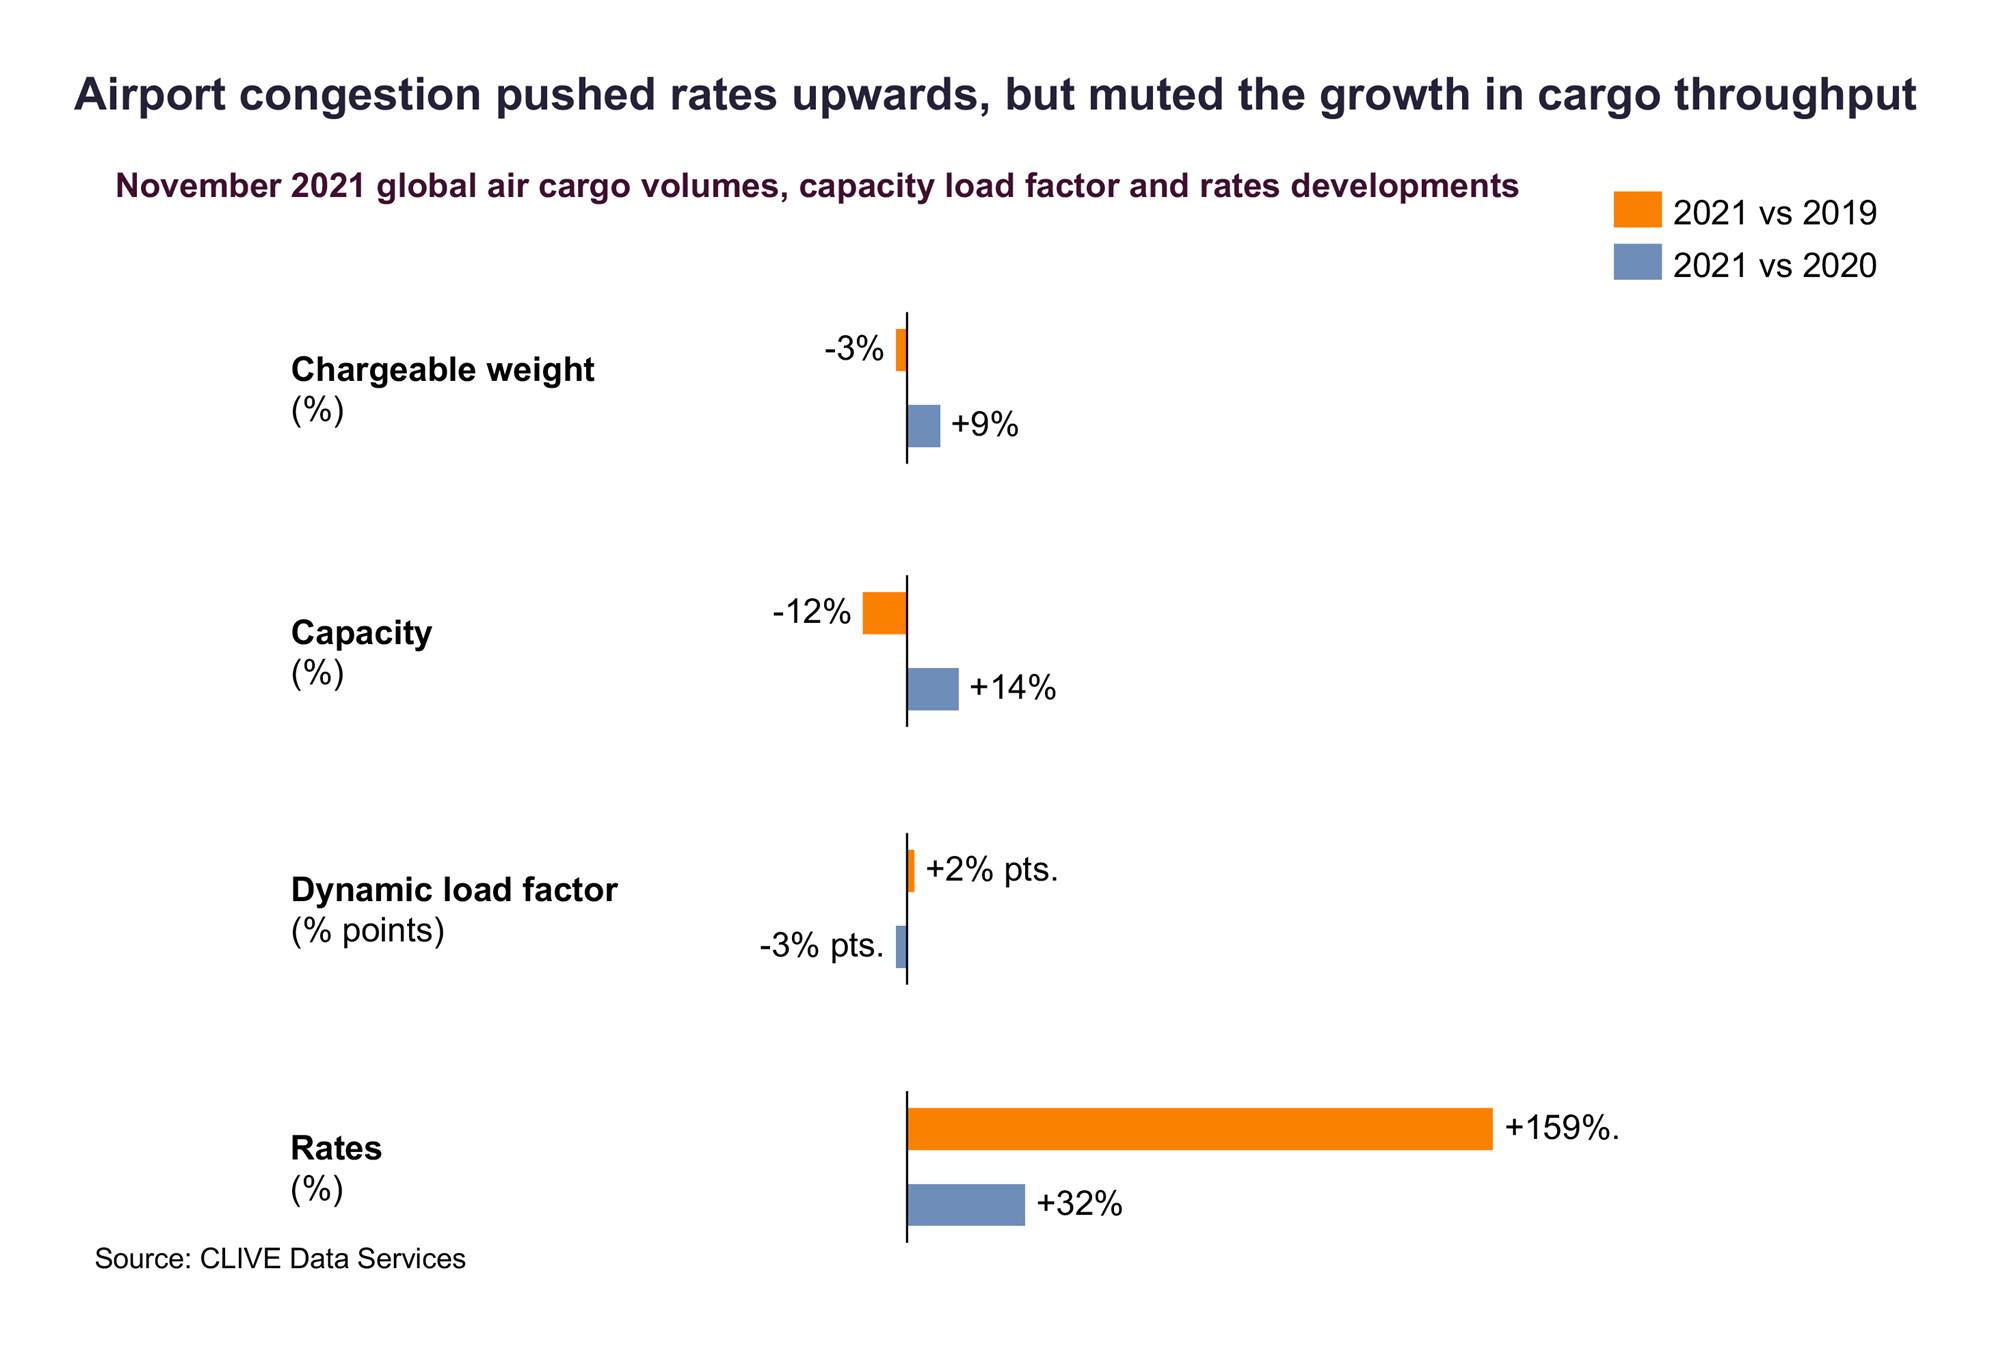 Self Photos / Files - Airport congestion pushed rates upwards, but muted the growth in cargo throughput